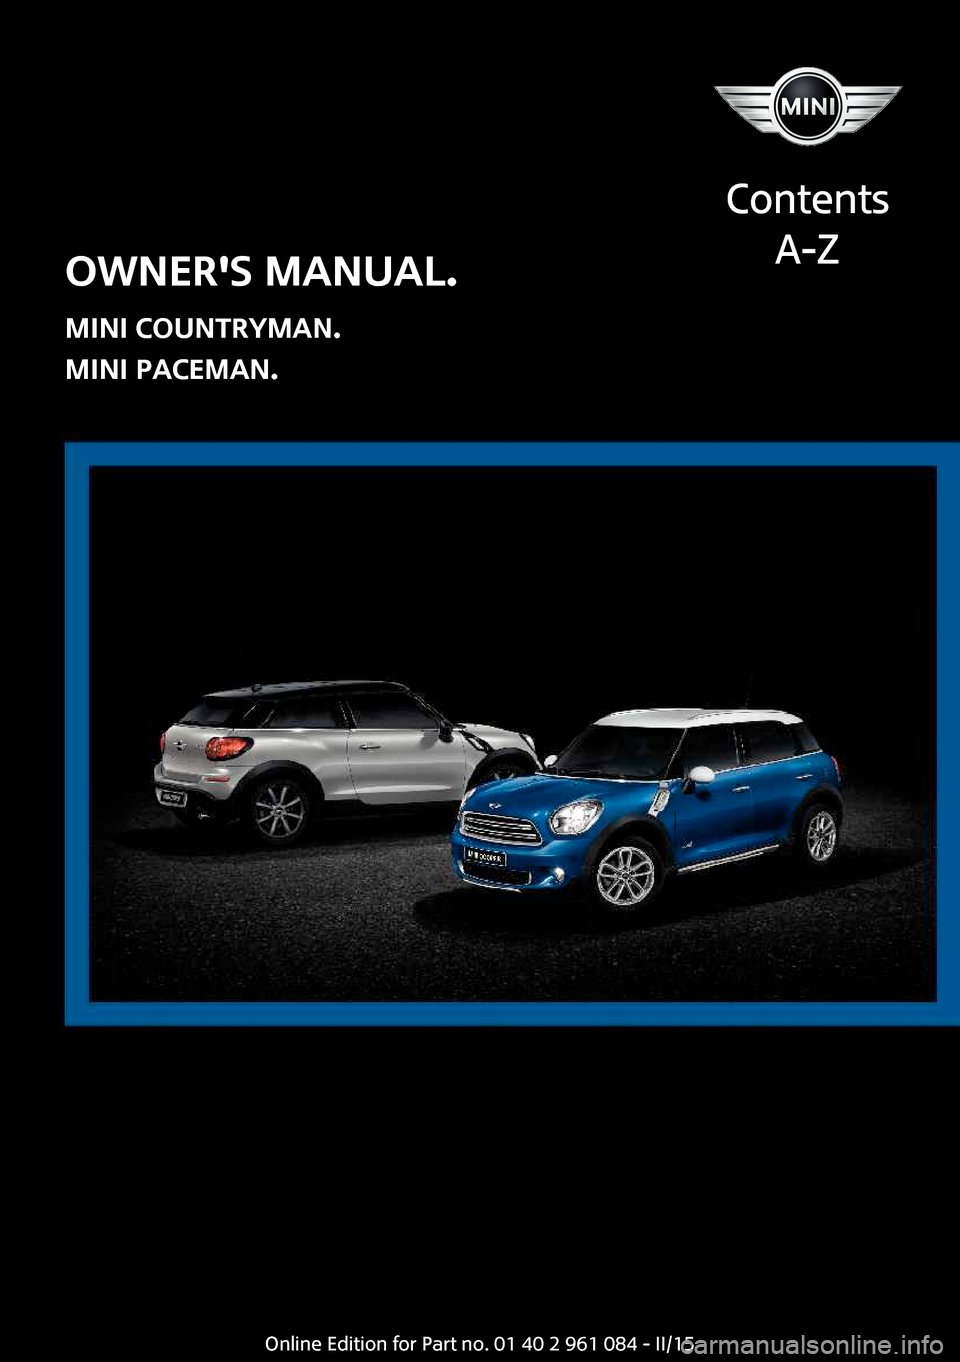 MINI Countryman 2015  Owners Manual OWNERS MANUAL.
MINI COUNTRYMAN.
MINI PACEMAN.
Contents
A-ZOnline Edition for Part no. 01 40 2 961 084 - II/15  